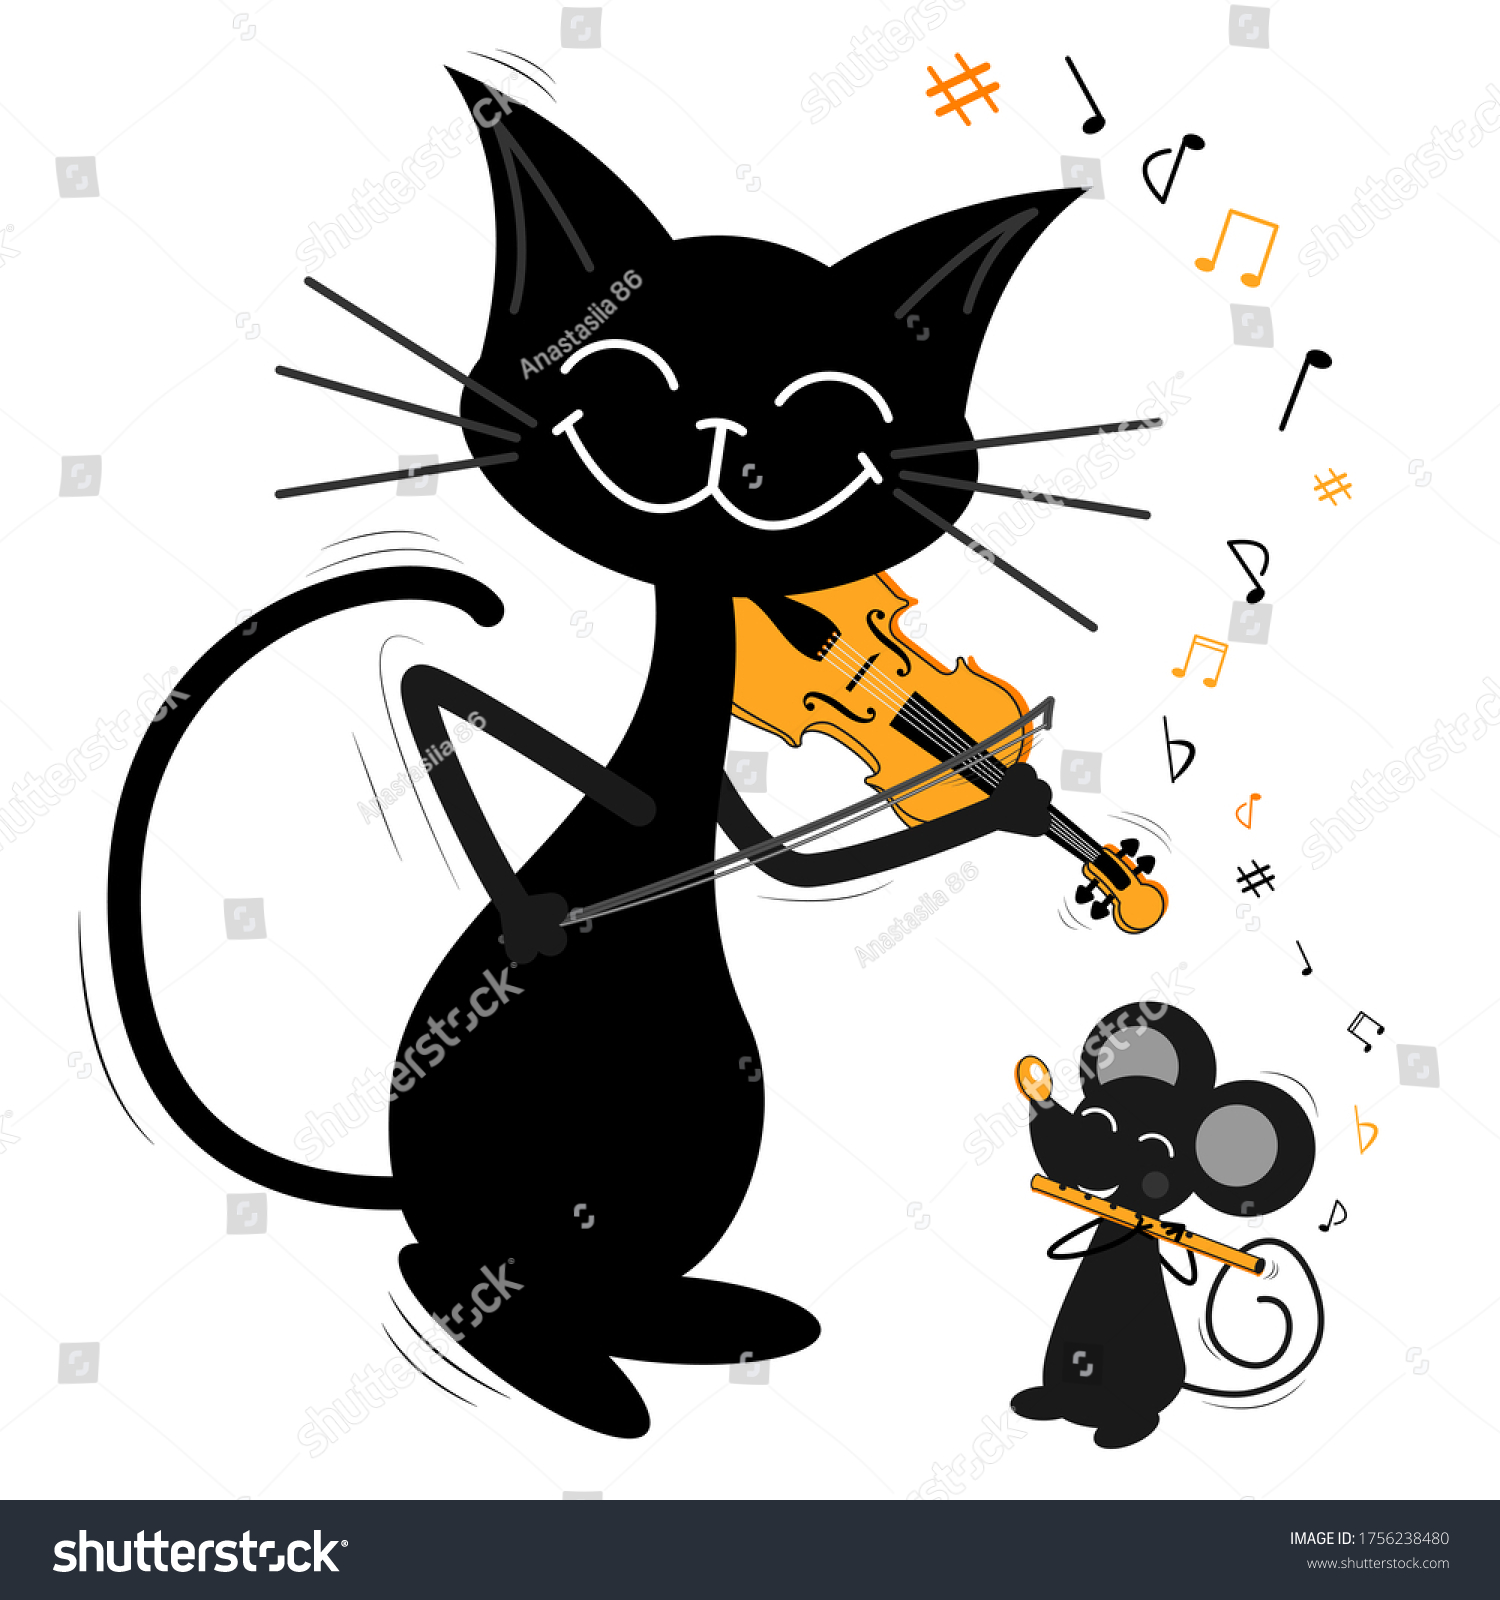 Two Musiciansfriends Black Cat Grey Mouse Stock Vector Royalty Free